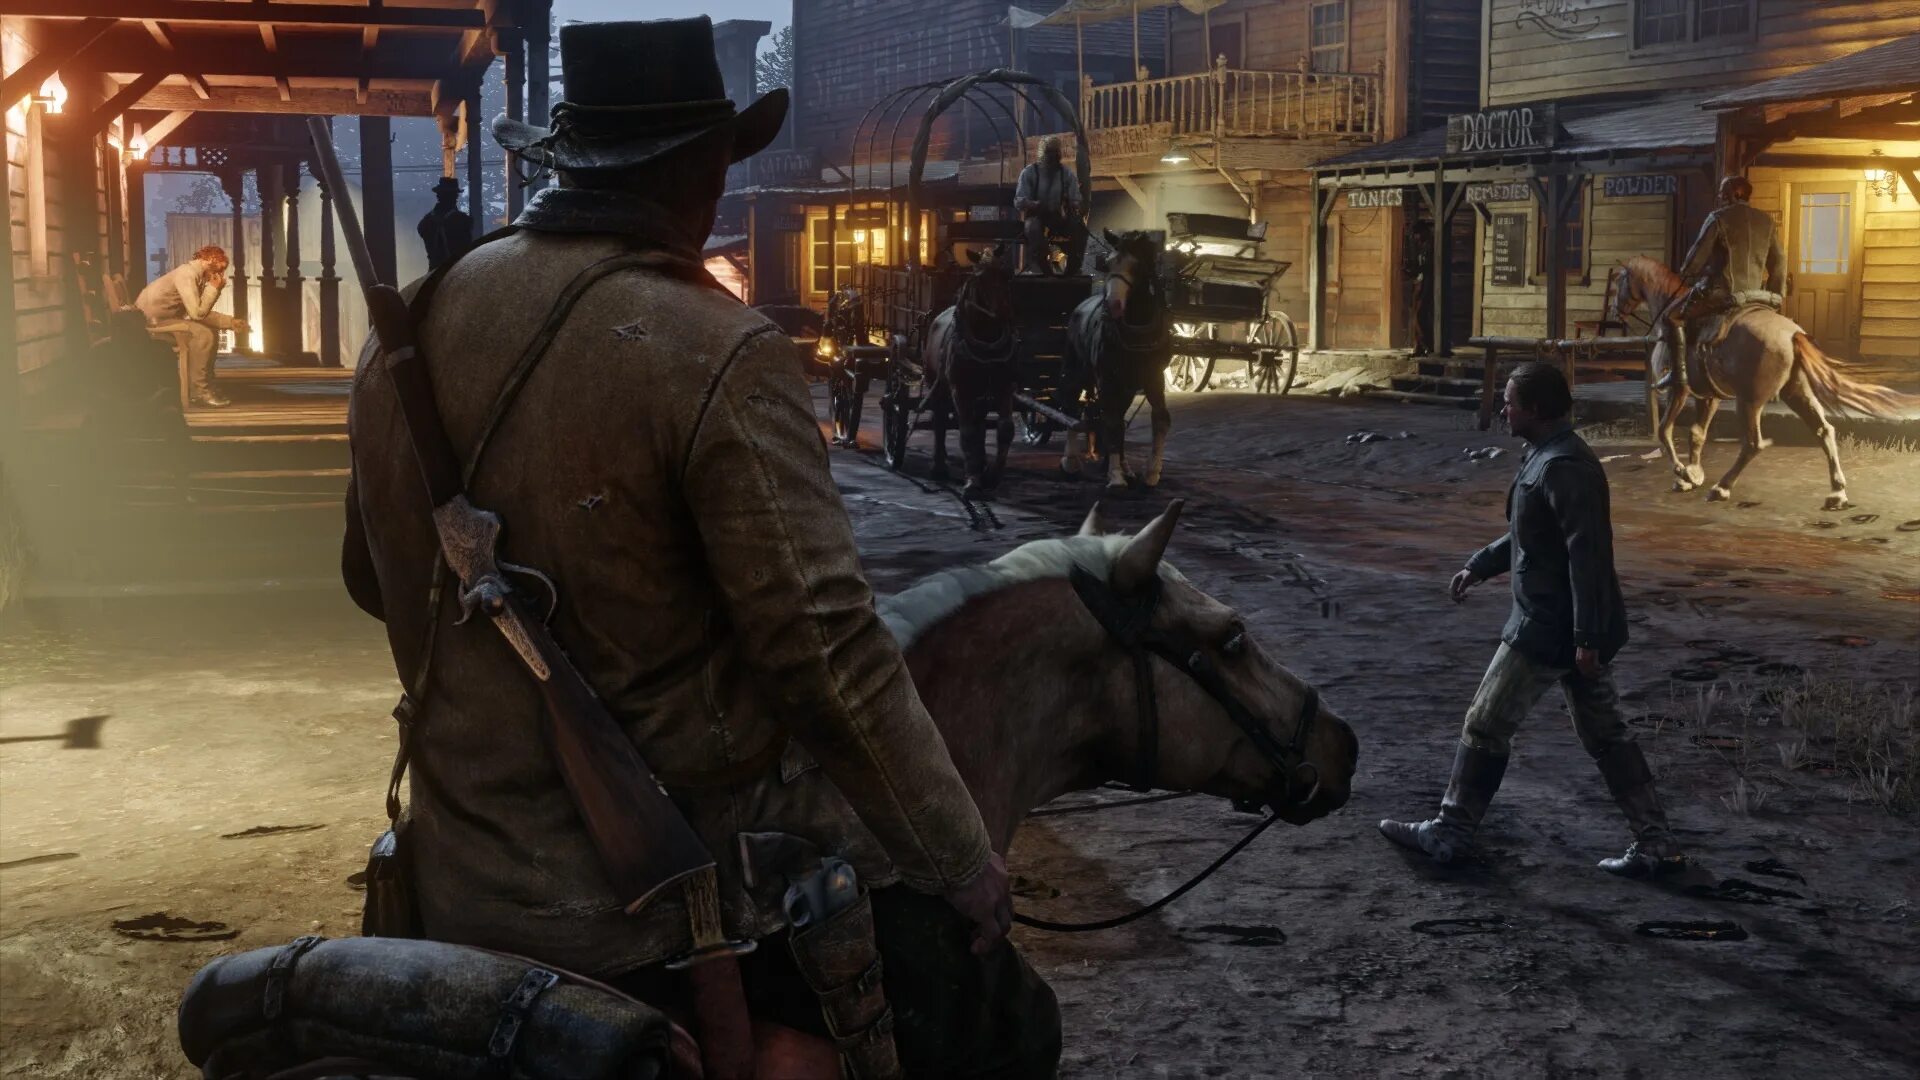 Игра Red Dead Redemption 2. Игра Red Dead Redemption 2 ps4. Игра Red Dead Redemption 4. Red Dead Redemption 2 ps4 Скриншоты.